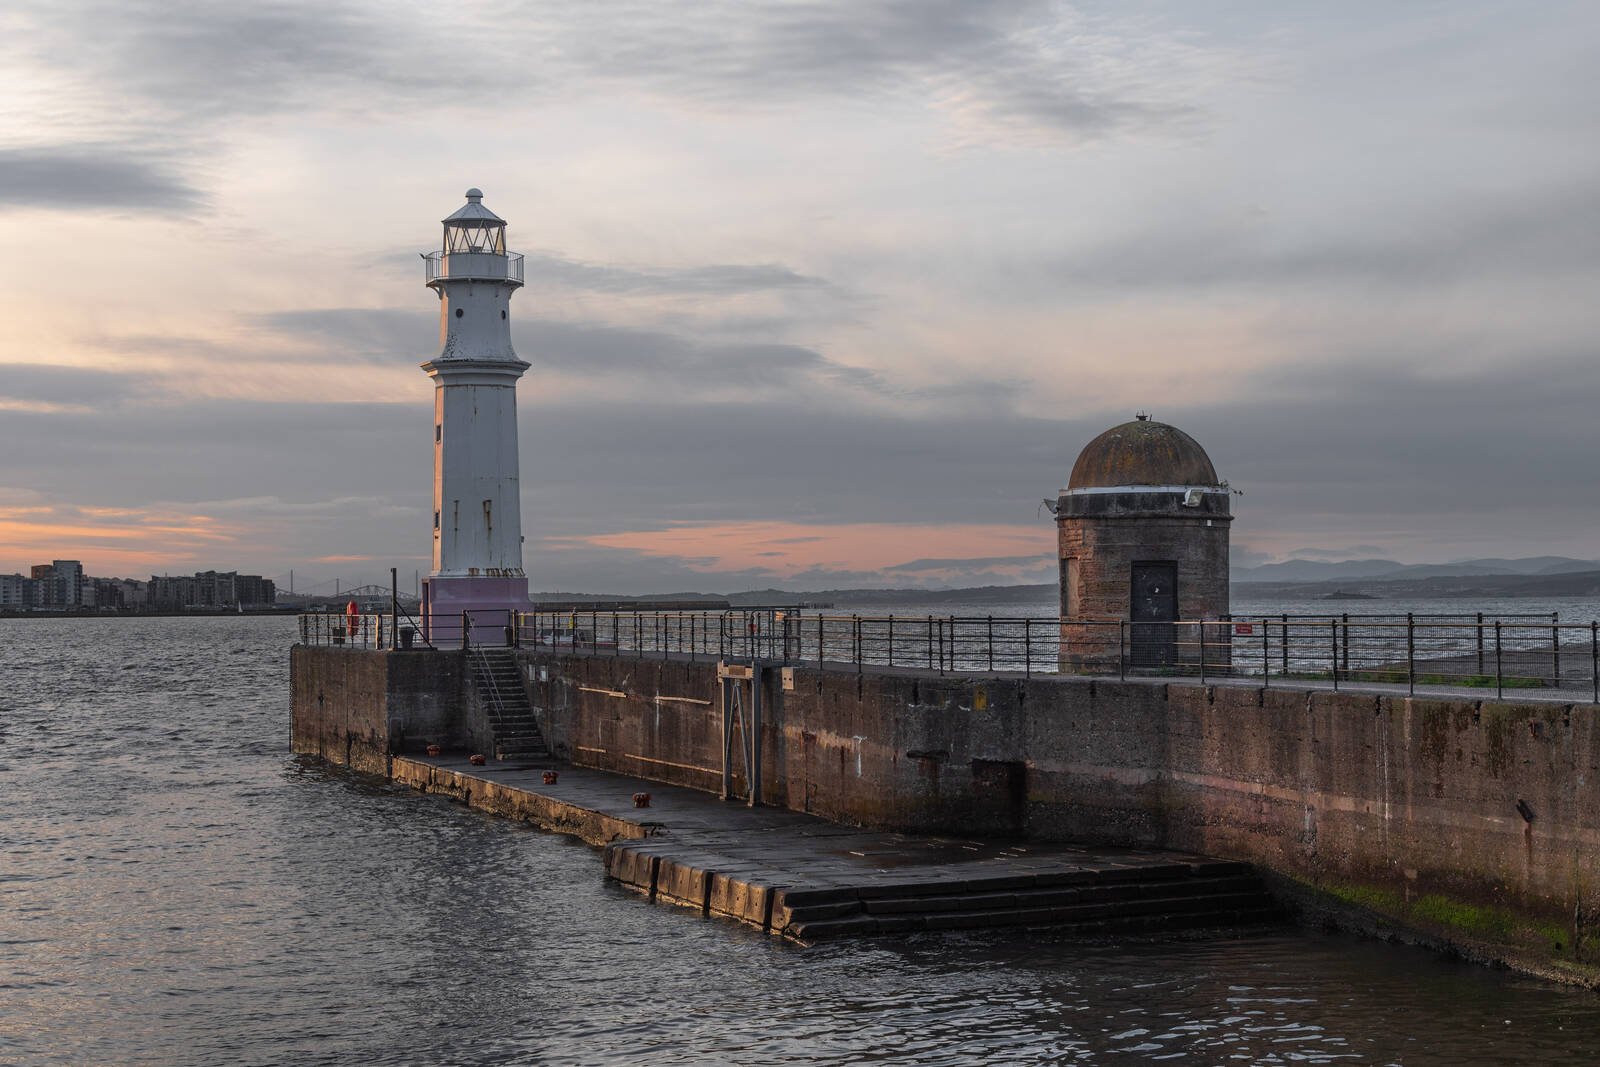 Image of Newhaven Harbour & Lighthouse by michael bennett